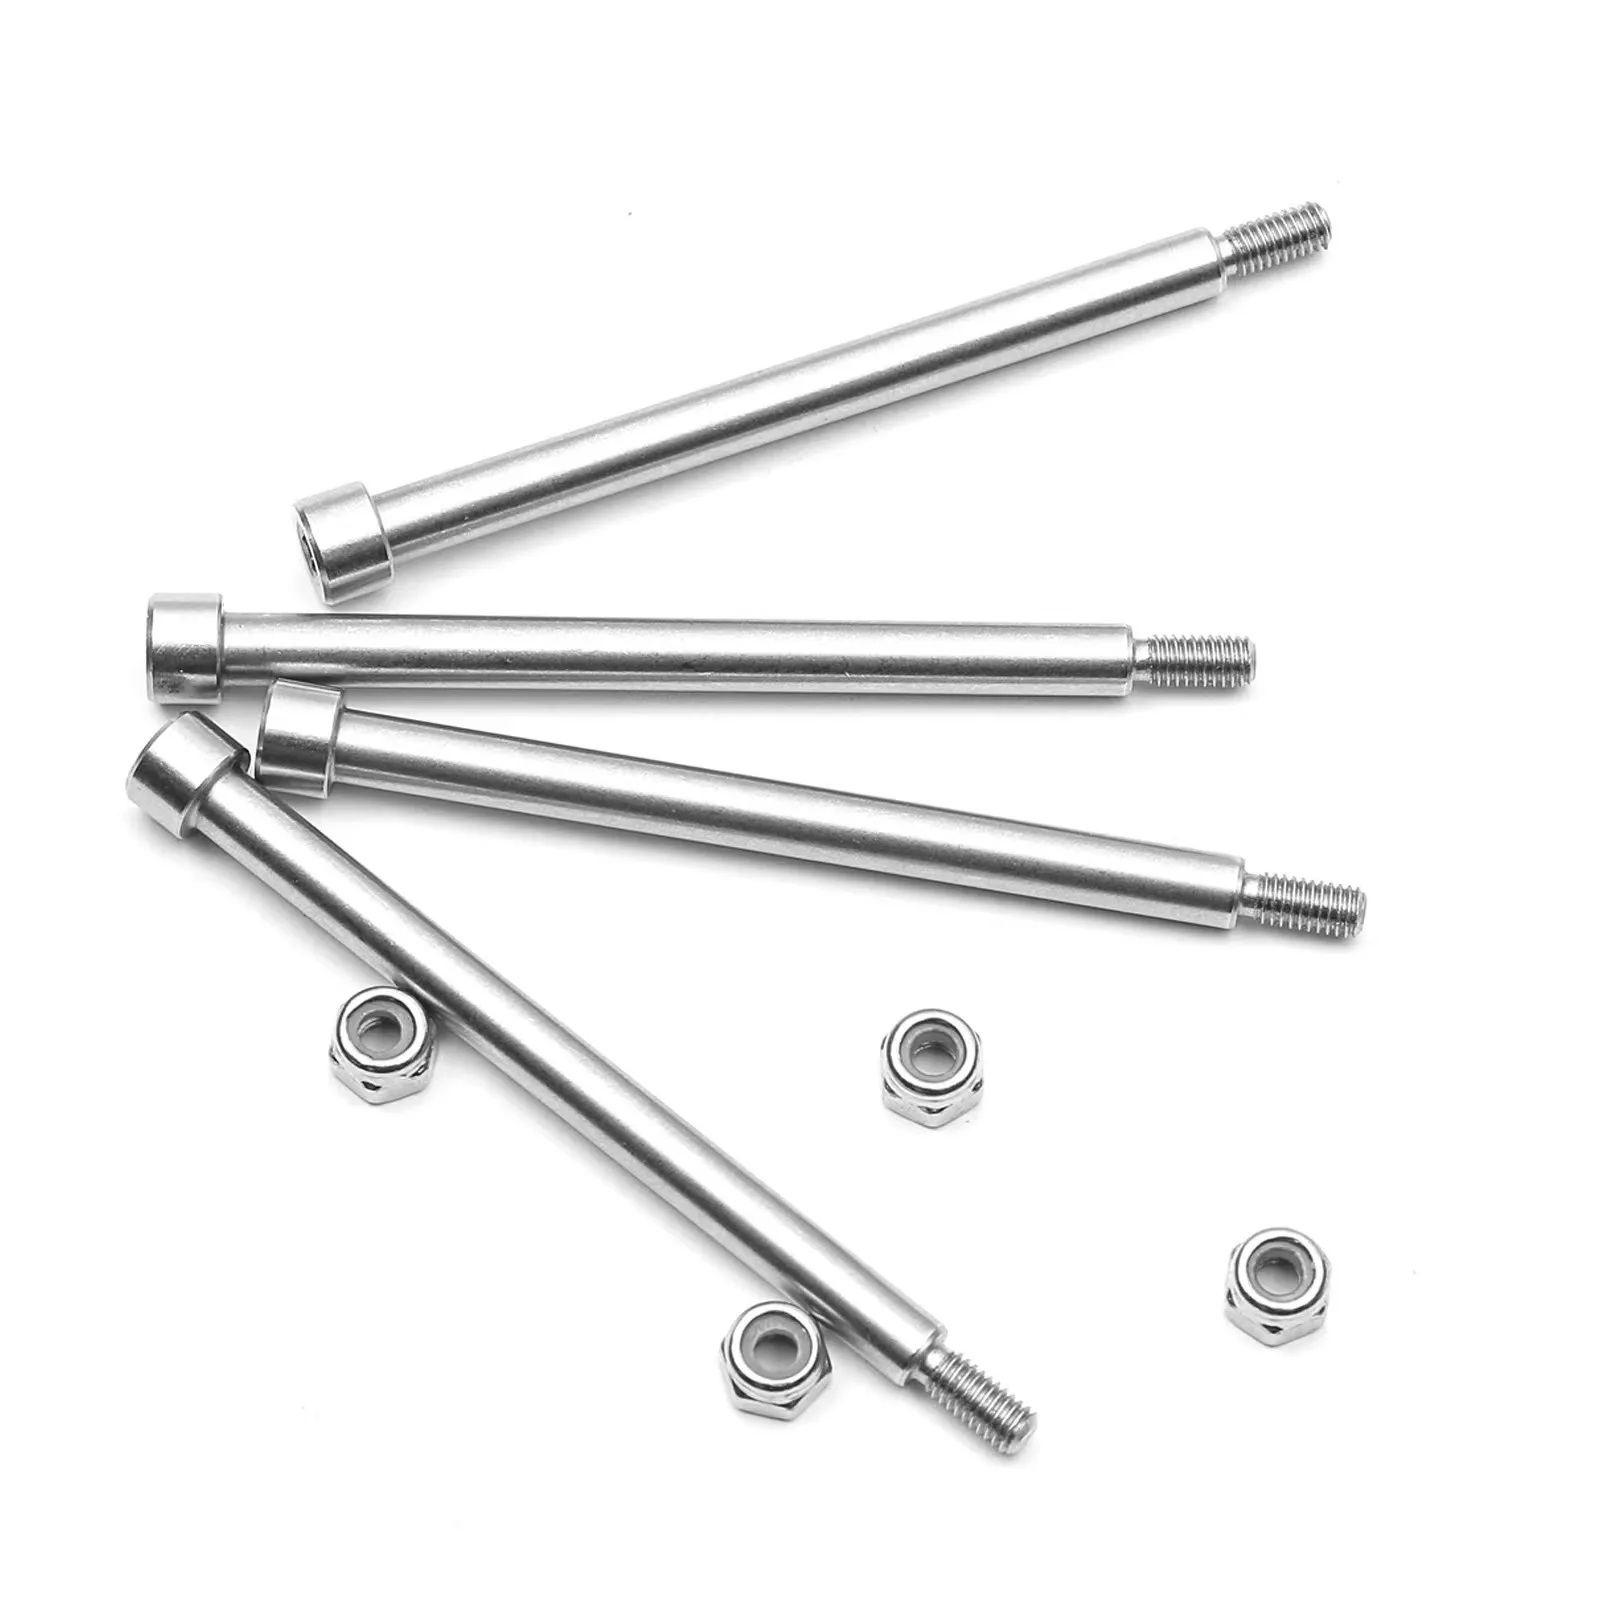 4Pcs 4x56mm Threaded Hinge Pins 70510 with M3 Nut for Traxxas 1/5 X-Maxx XMAXX 1/6 XRT RC Car Upgrade Parts Accessories